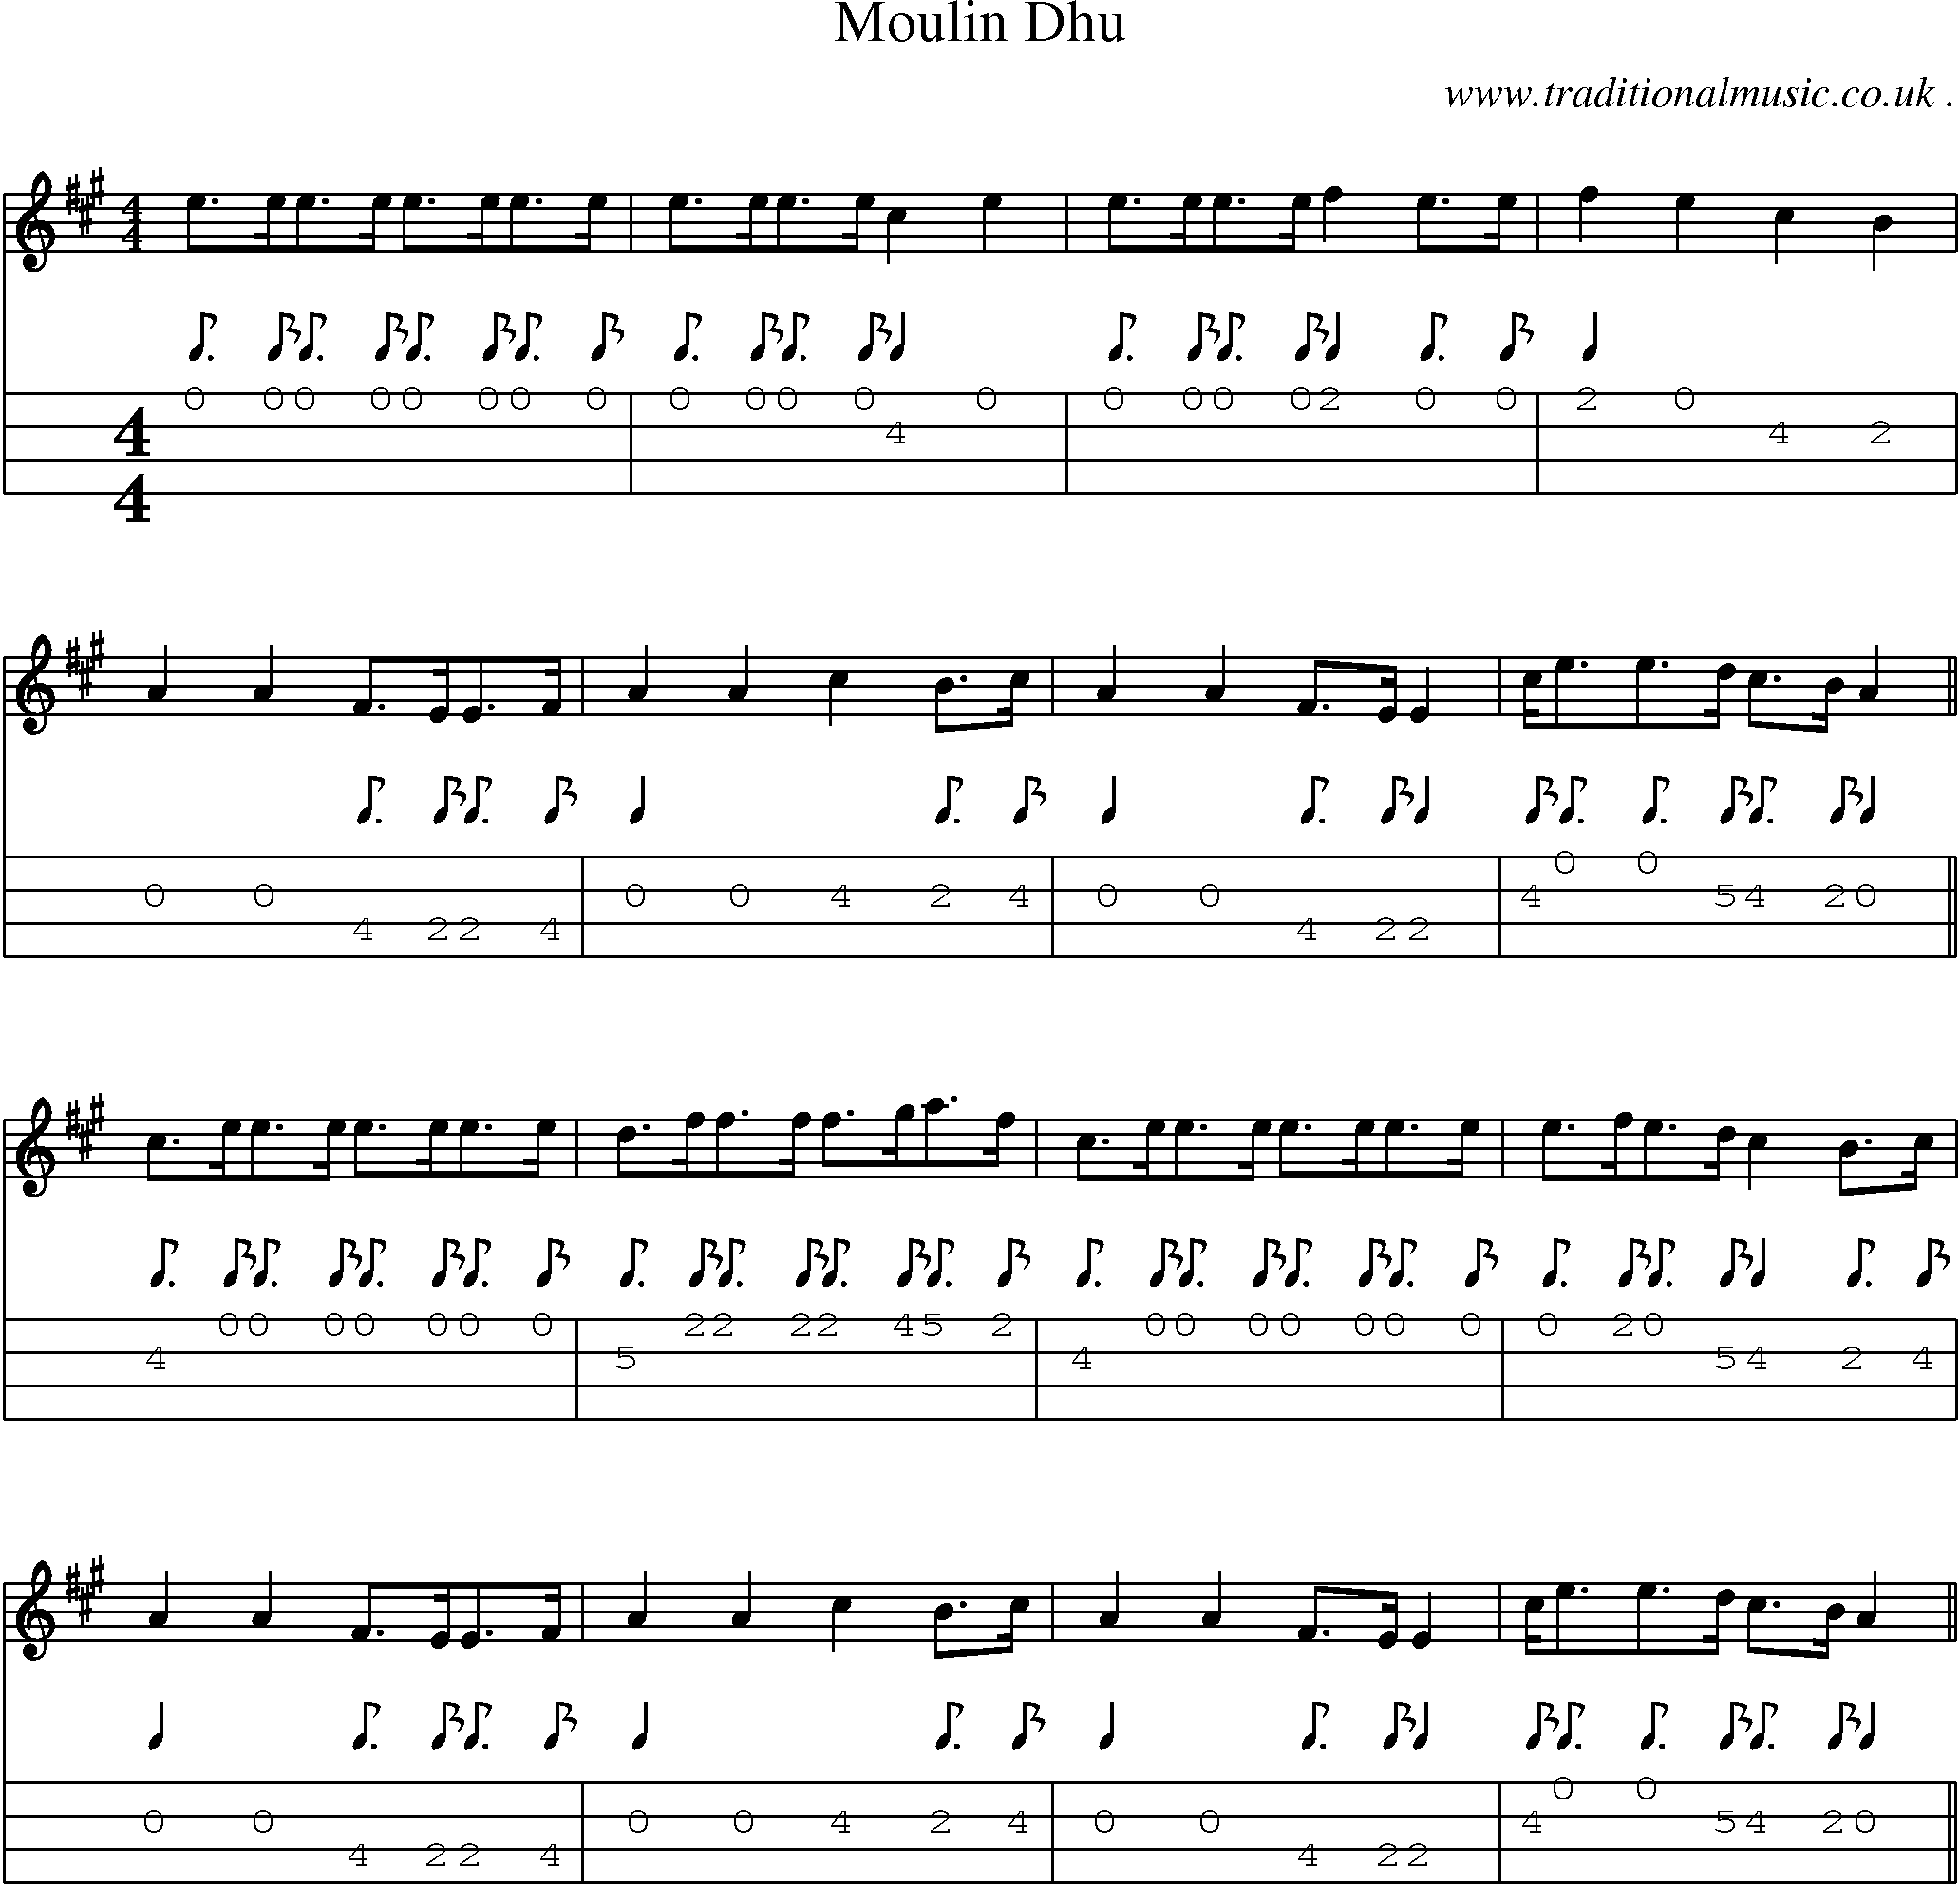 Sheet-Music and Mandolin Tabs for Moulin Dhu